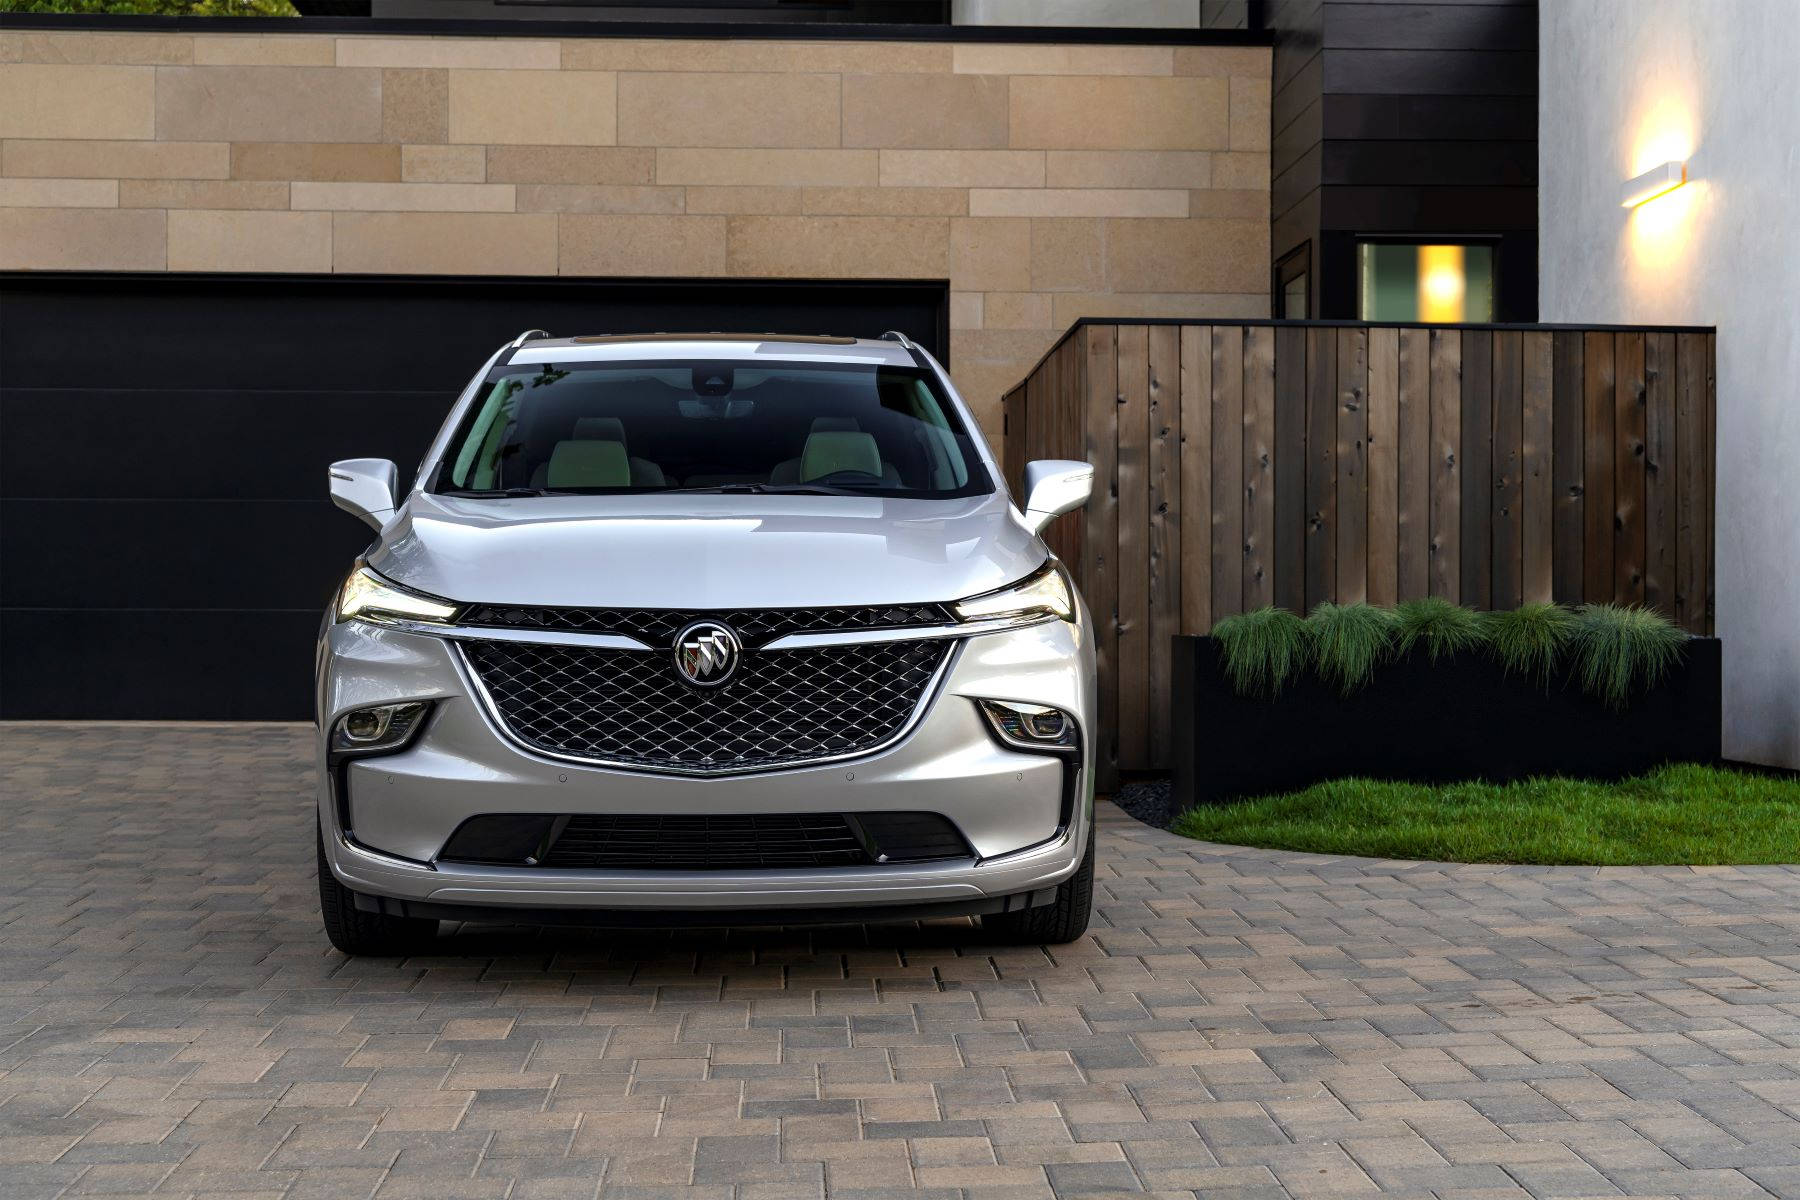 Buick Enclave At A Home Garage Wallpaper